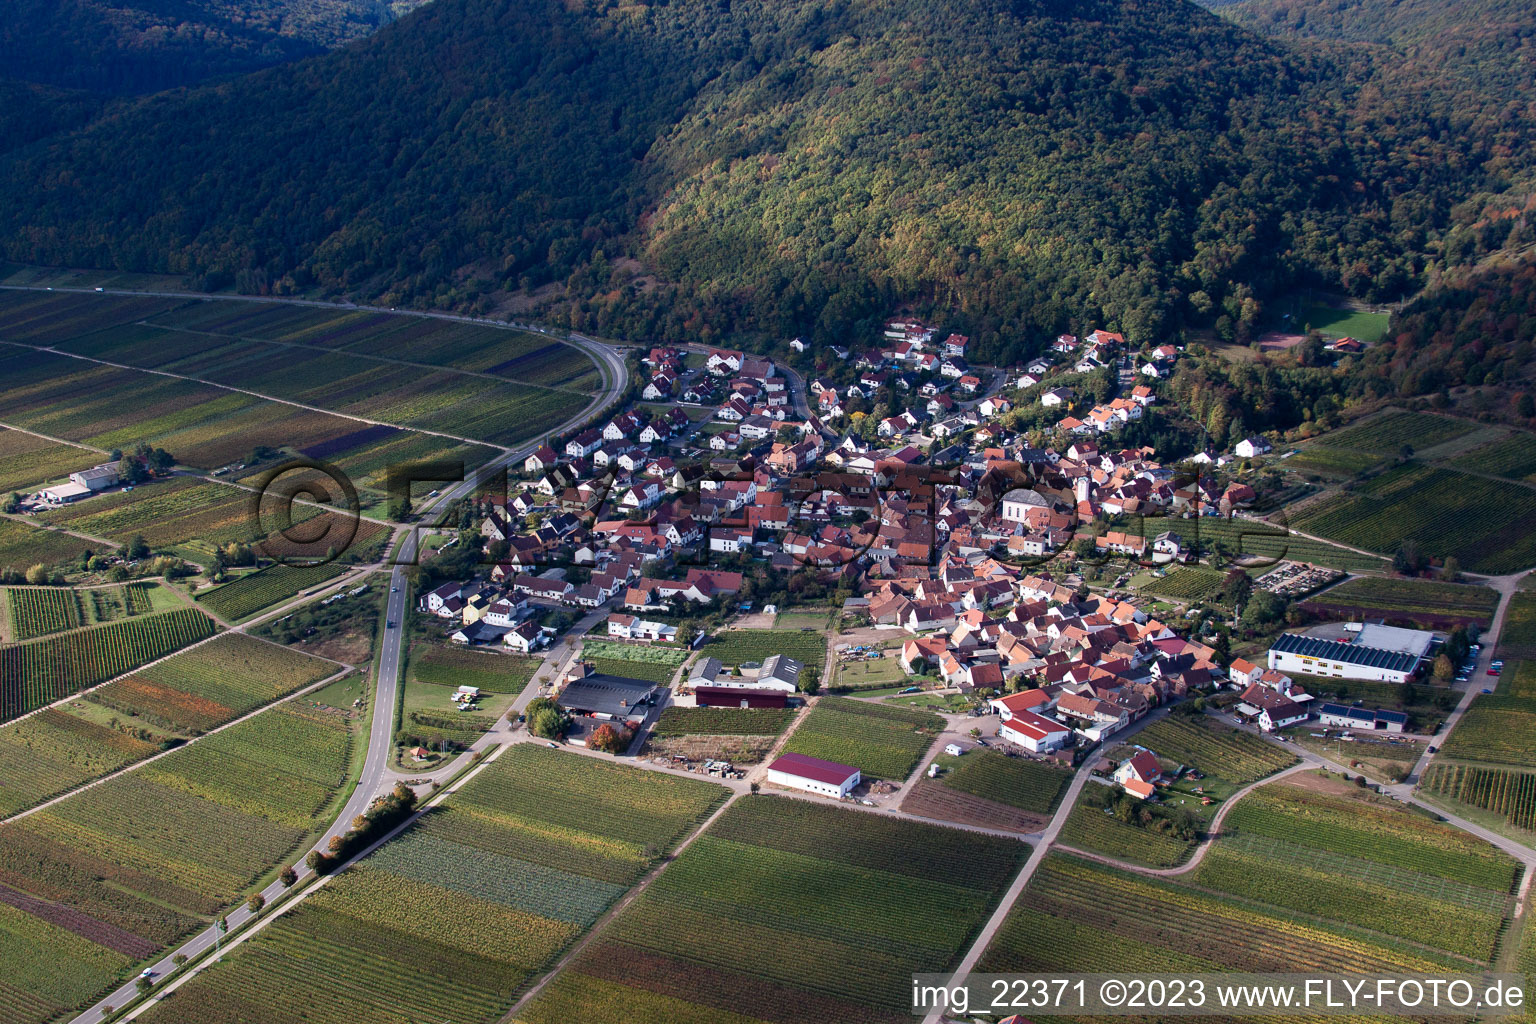 Eschbach in the state Rhineland-Palatinate, Germany from the plane